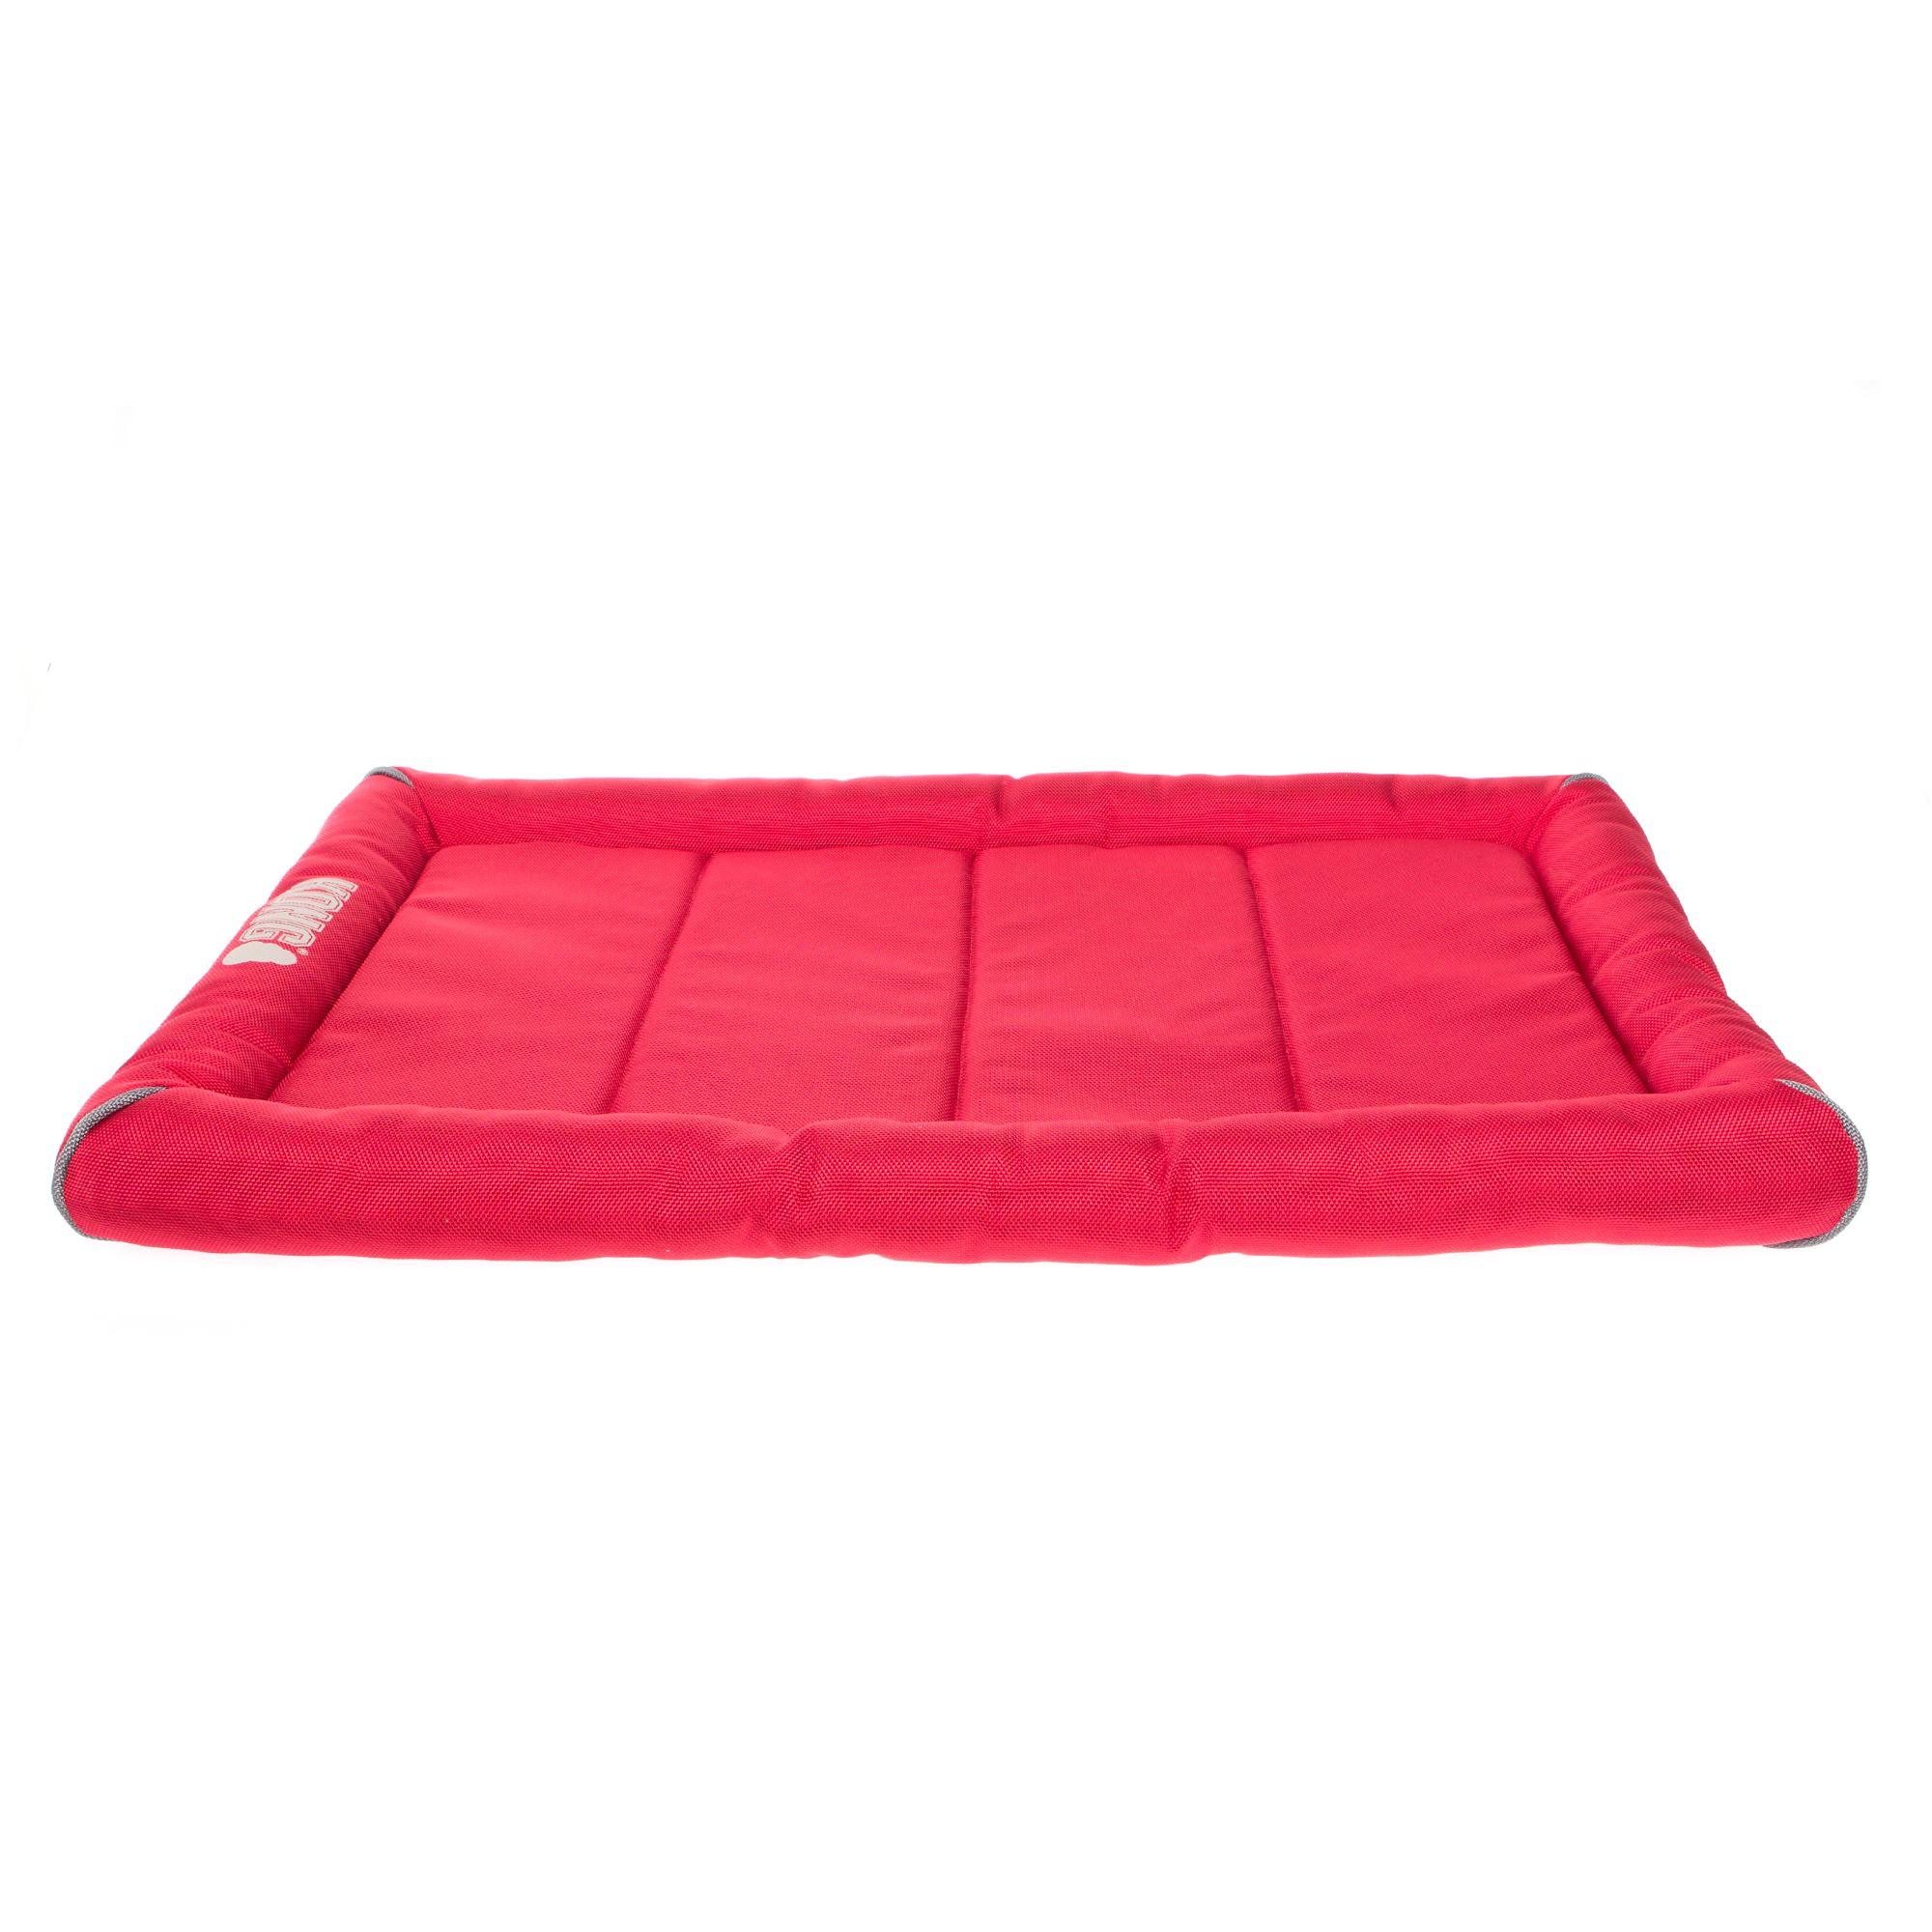 kong chew proof dog bed